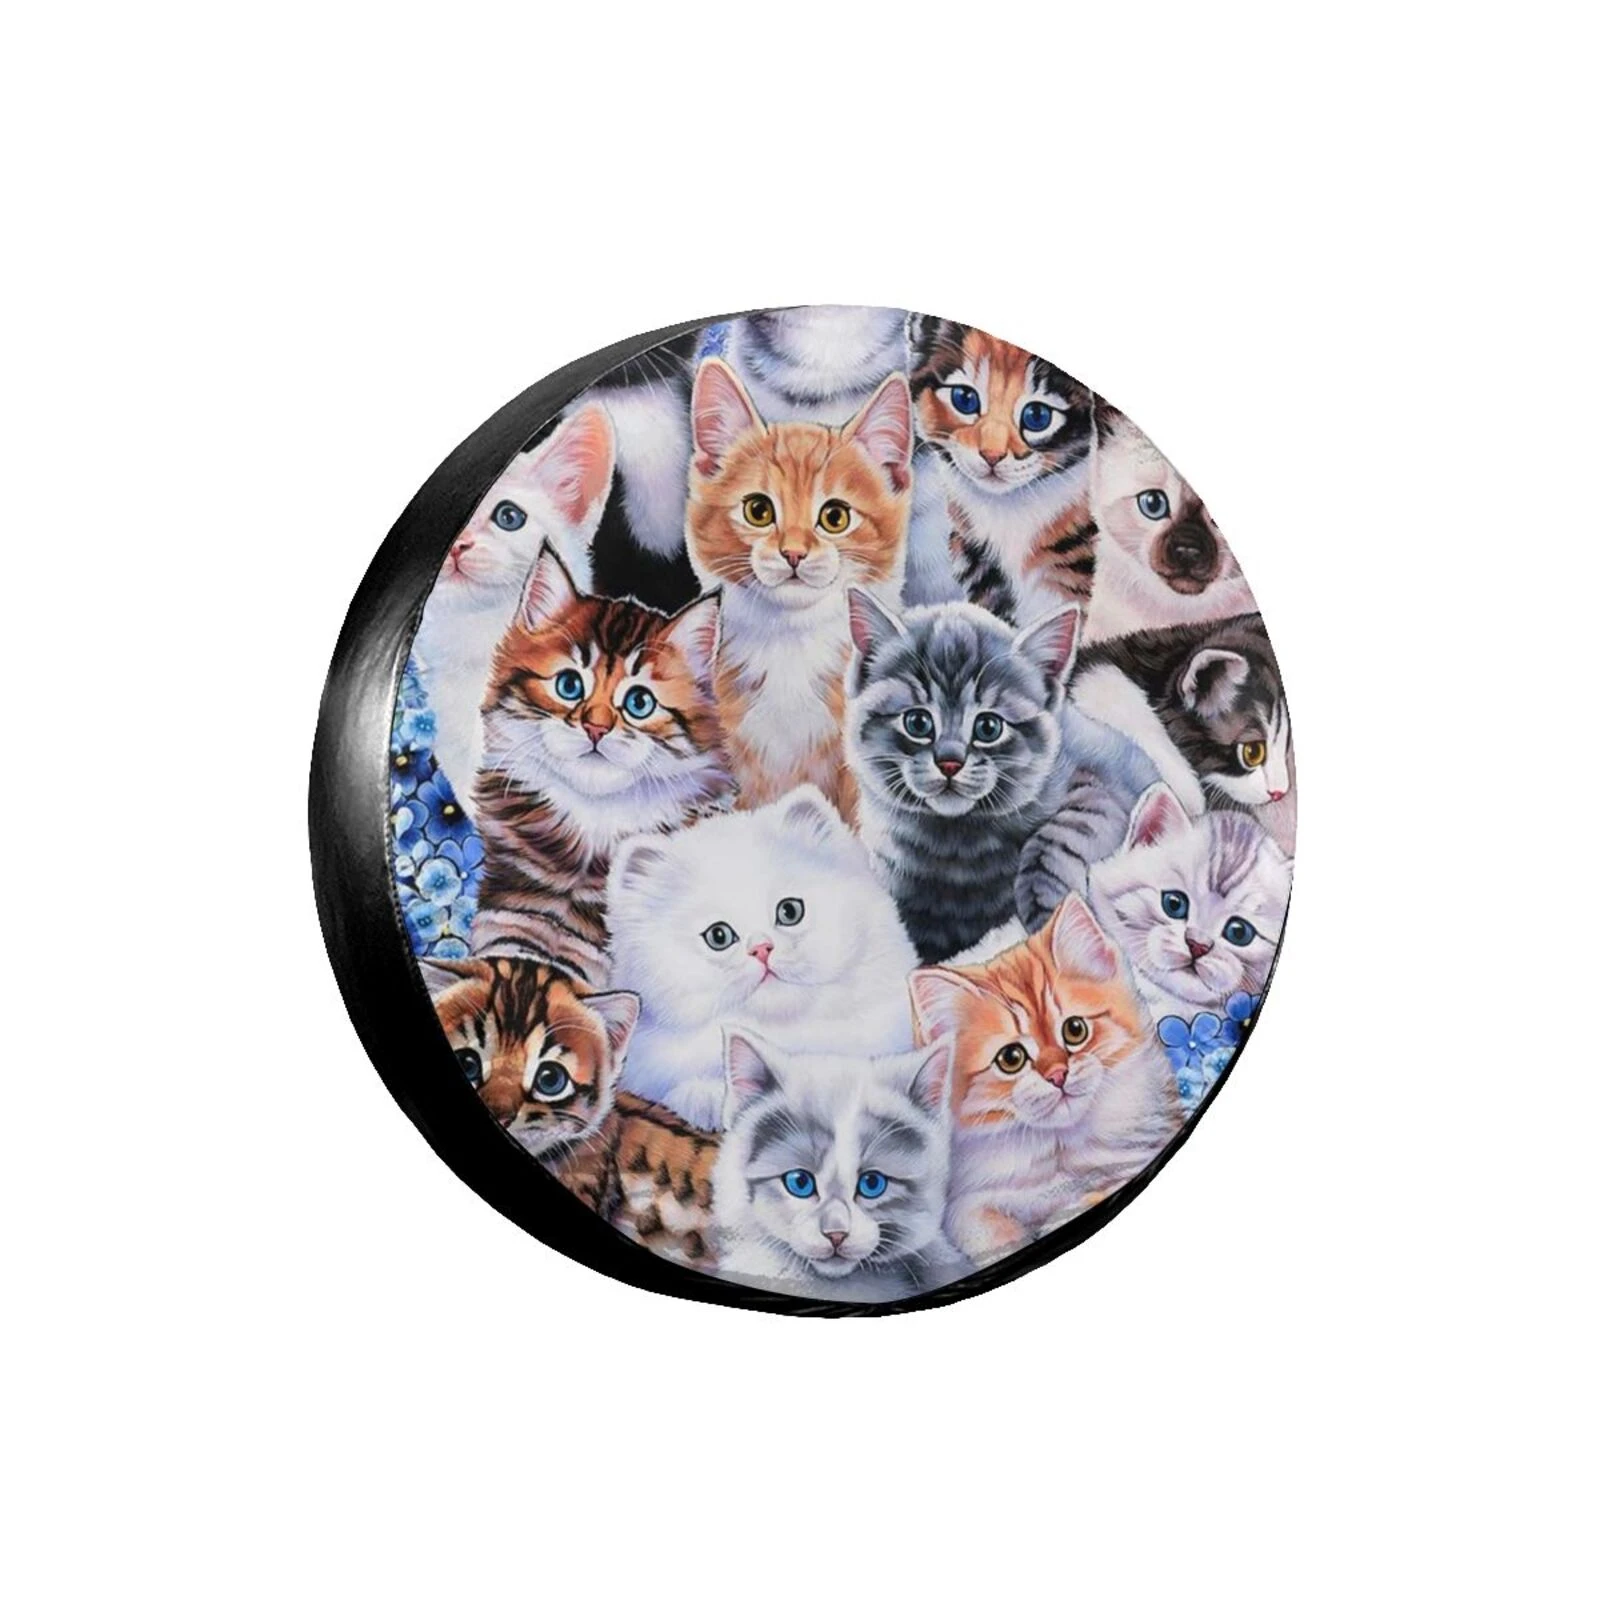 3D Printed Cat Spare Tire Cover Waterproof Dust-Proof UV Sun Wheel Tire Cover Fit for Jeep,Trailer, Car Covers